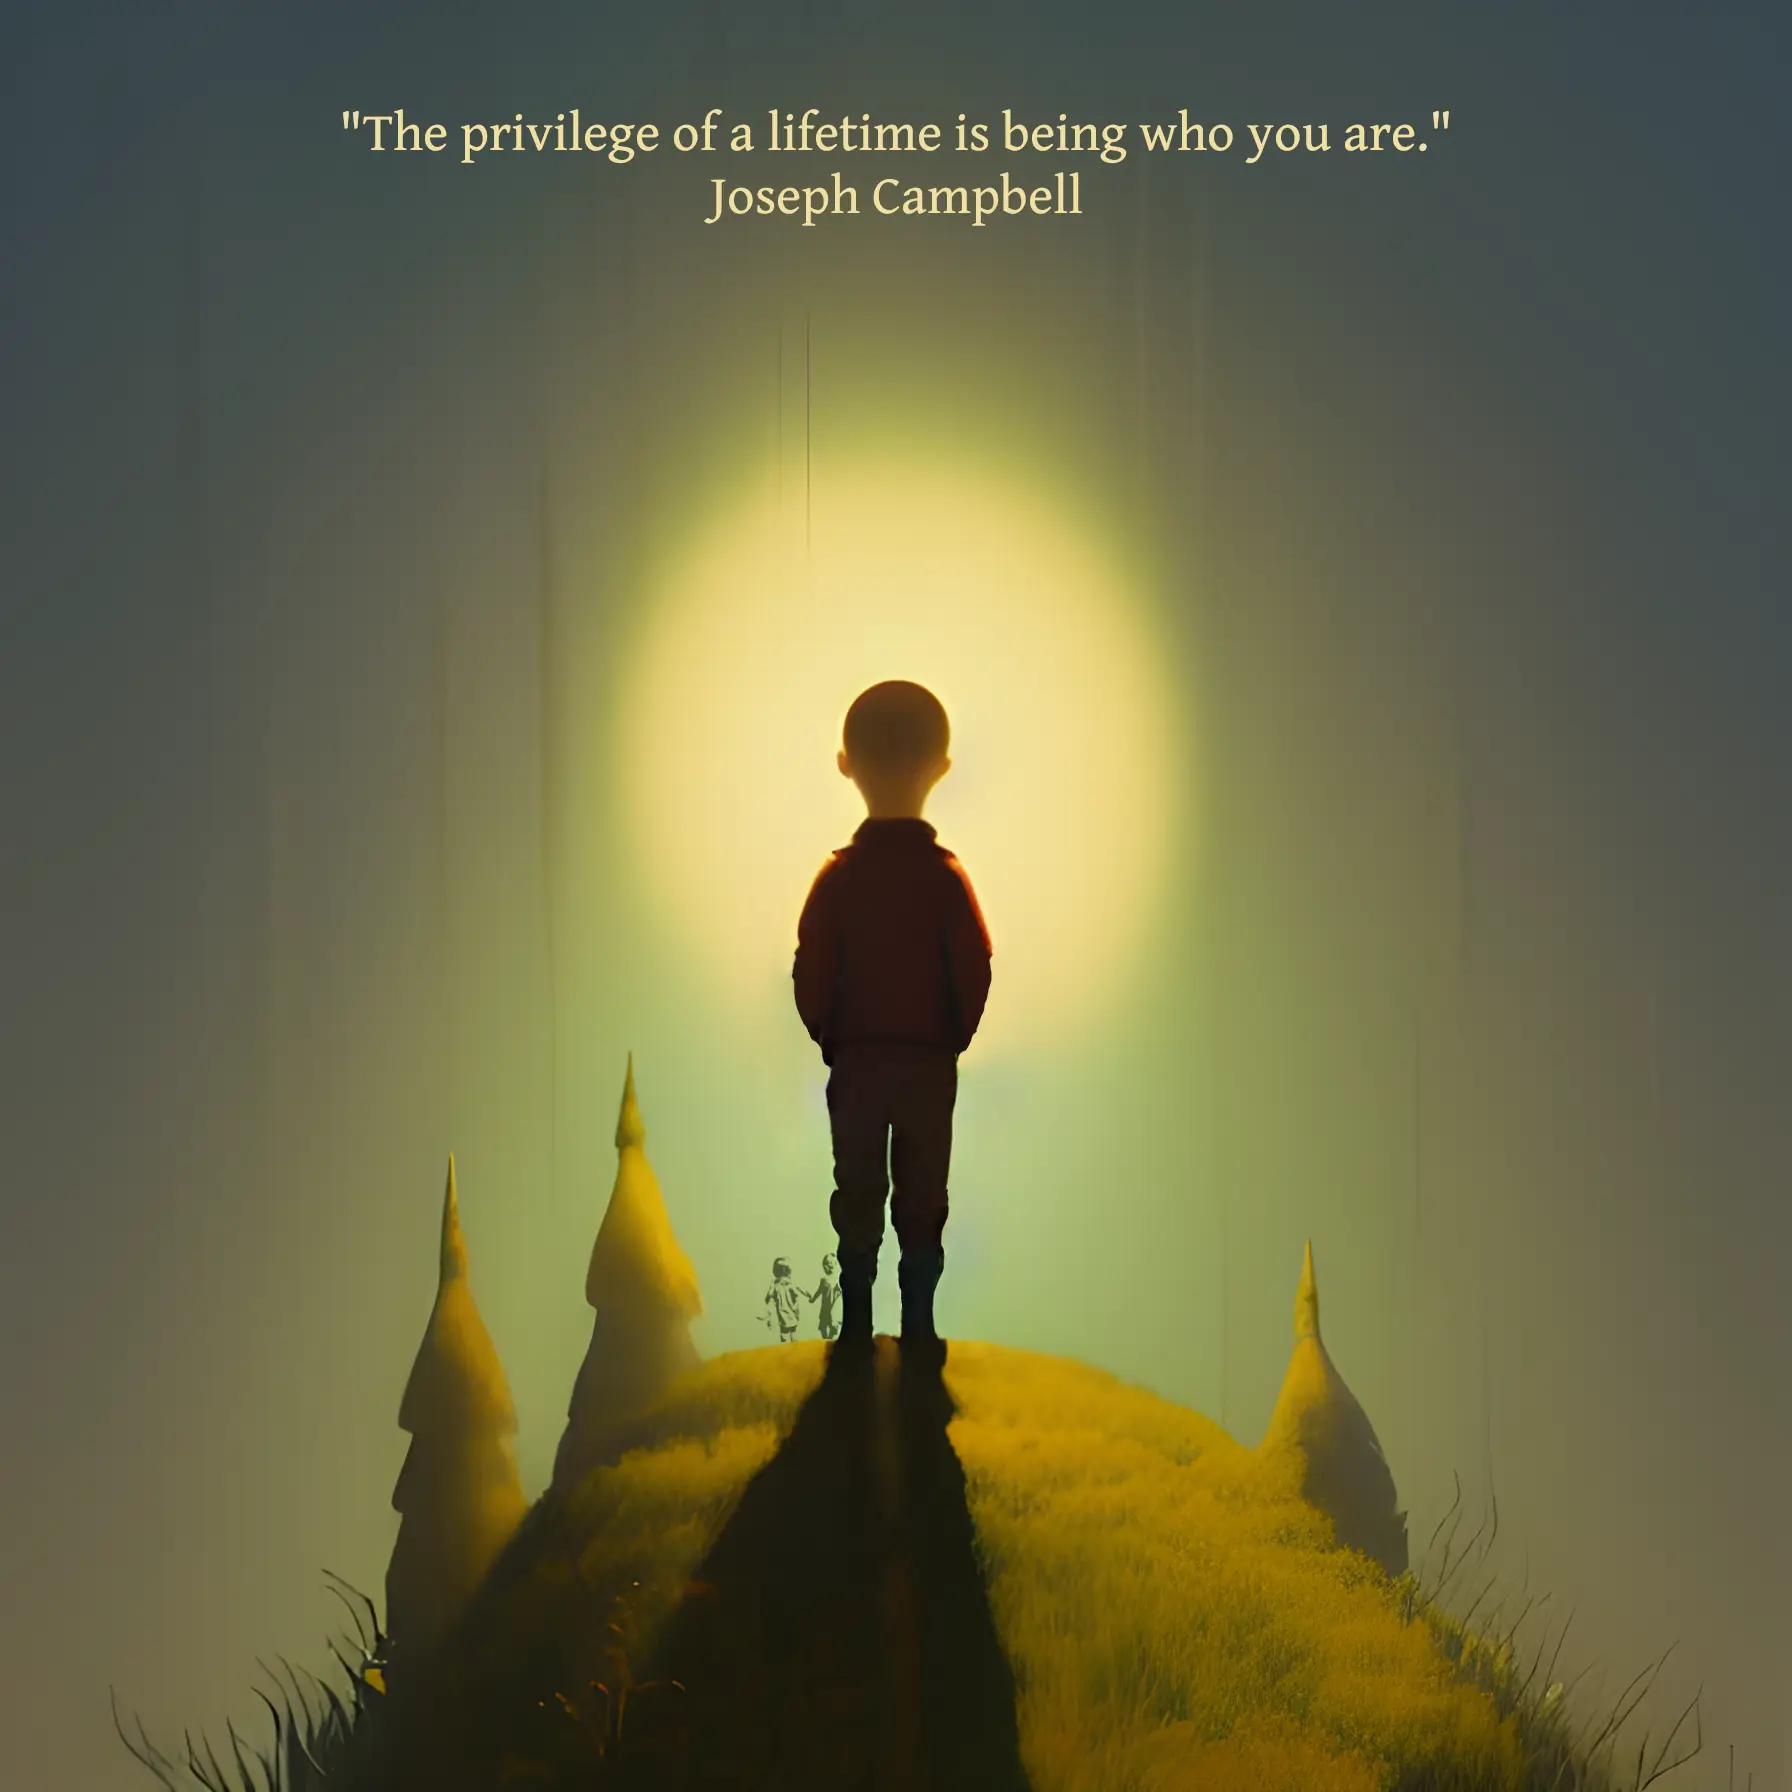 A figure stands on the top of a hill. A hazy sun in the distance creates a halo around the figure. The quote by Joseph Campbell reads: "The privilege of a lifetime is being who you are.”